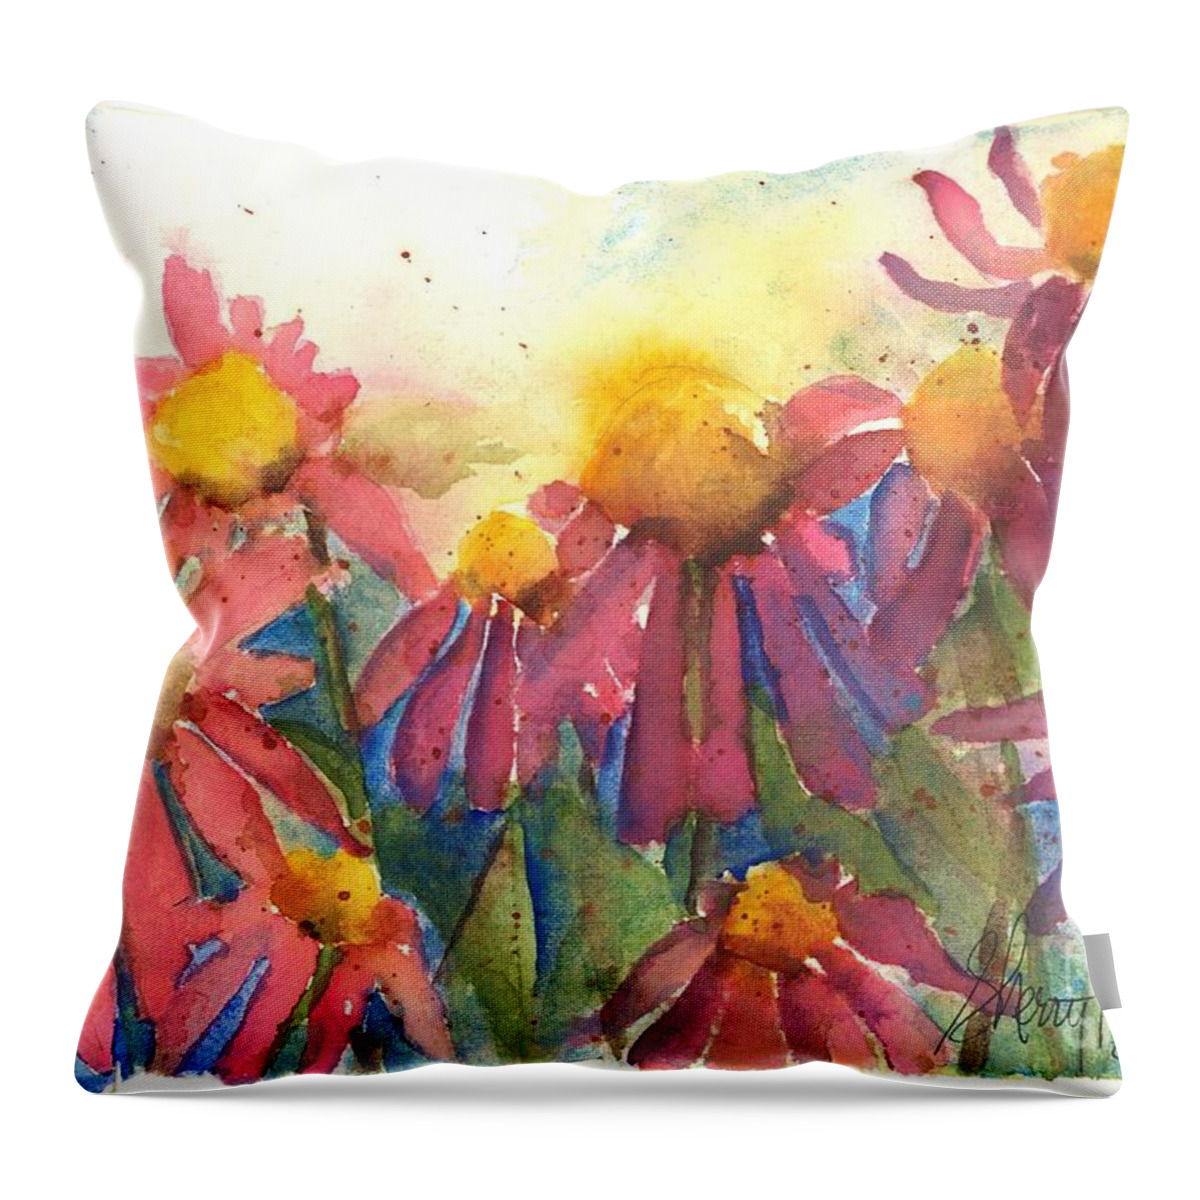 Orchards Throw Pillow featuring the painting Pick Me Pick Me by Sherry Harradence